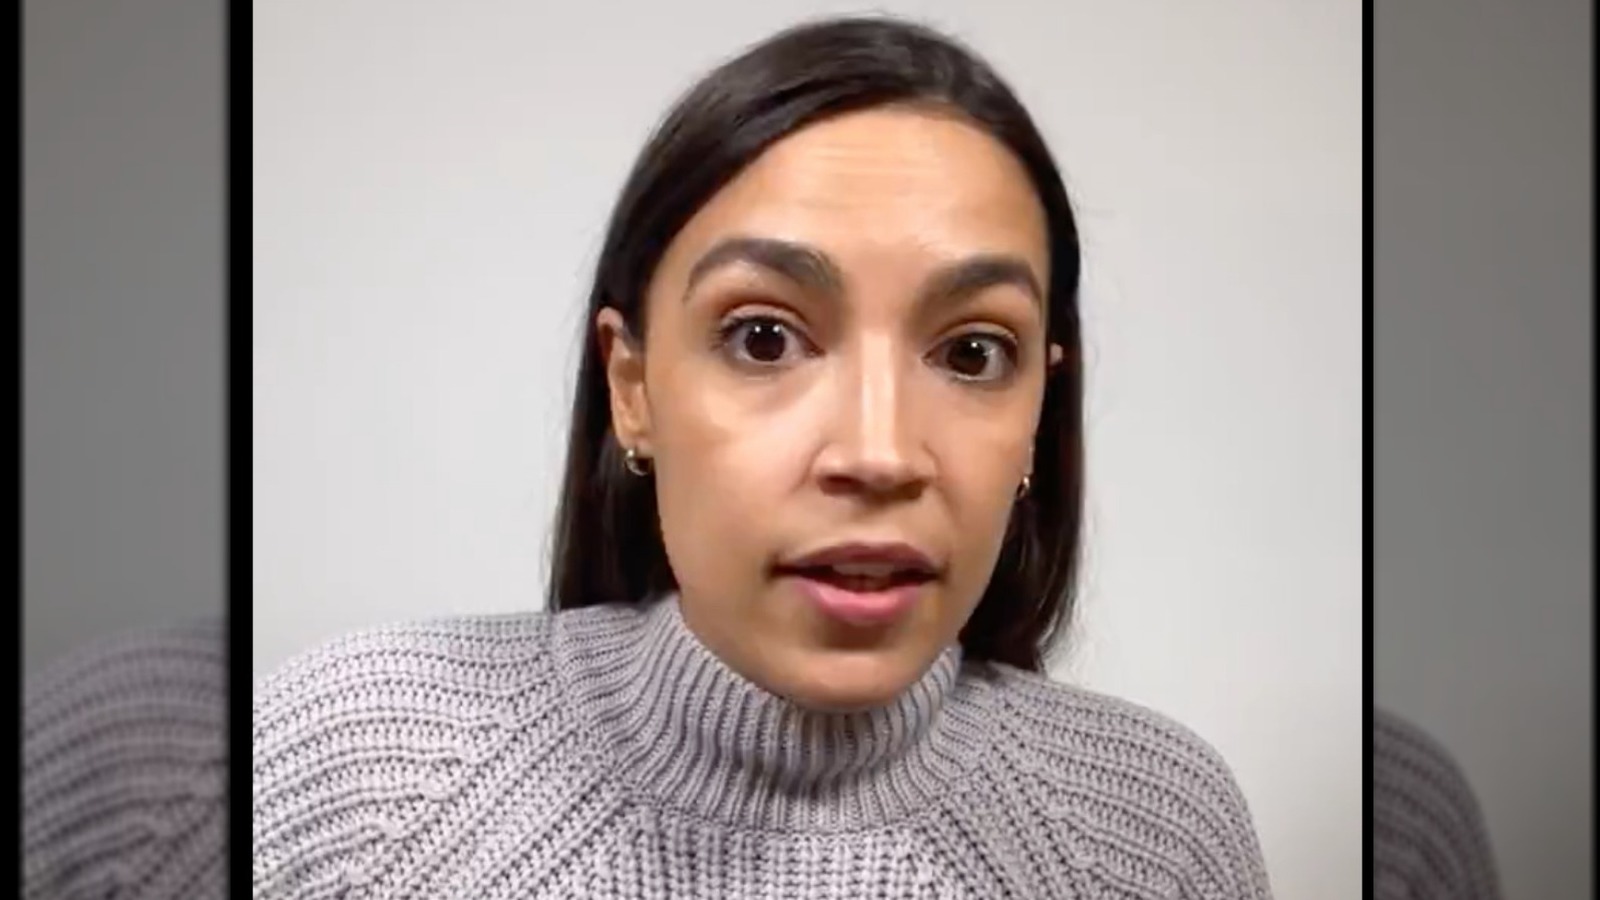 Alexandria Ocasio-Cortez Opens Up During A Deeply Moving Instagram Live